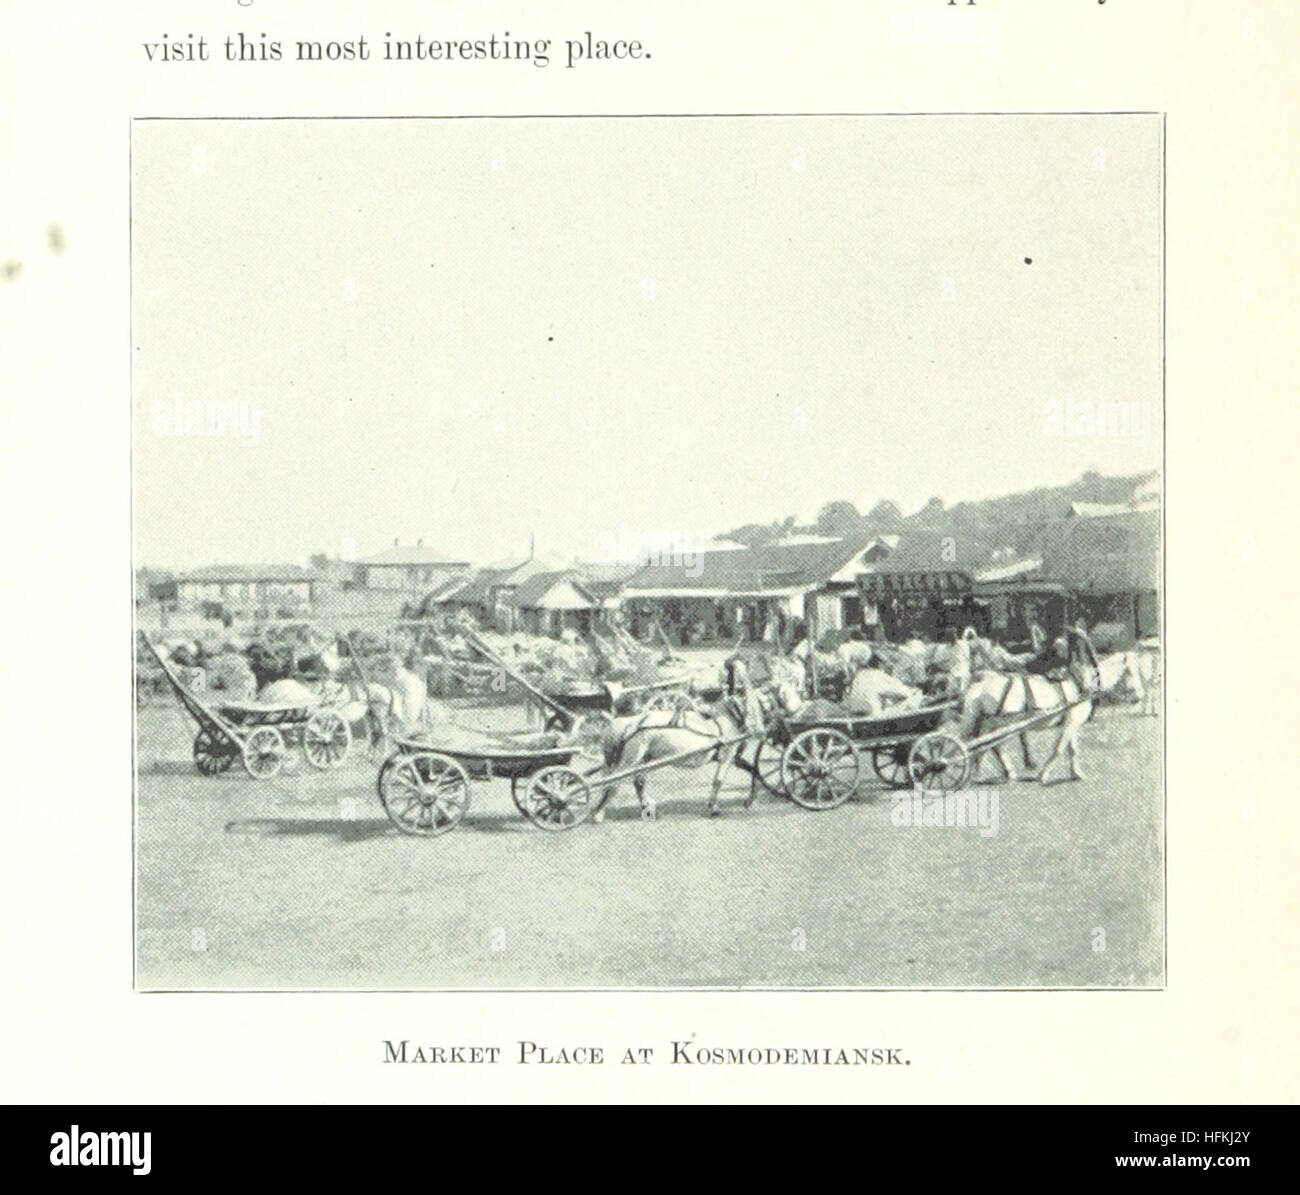 Image taken from page 90 of 'Reminiscences of Russia. The Ural Mountains and adjoining Siberian district in 1897' Image taken from page 90 of 'Reminiscences of Russia The Stock Photo